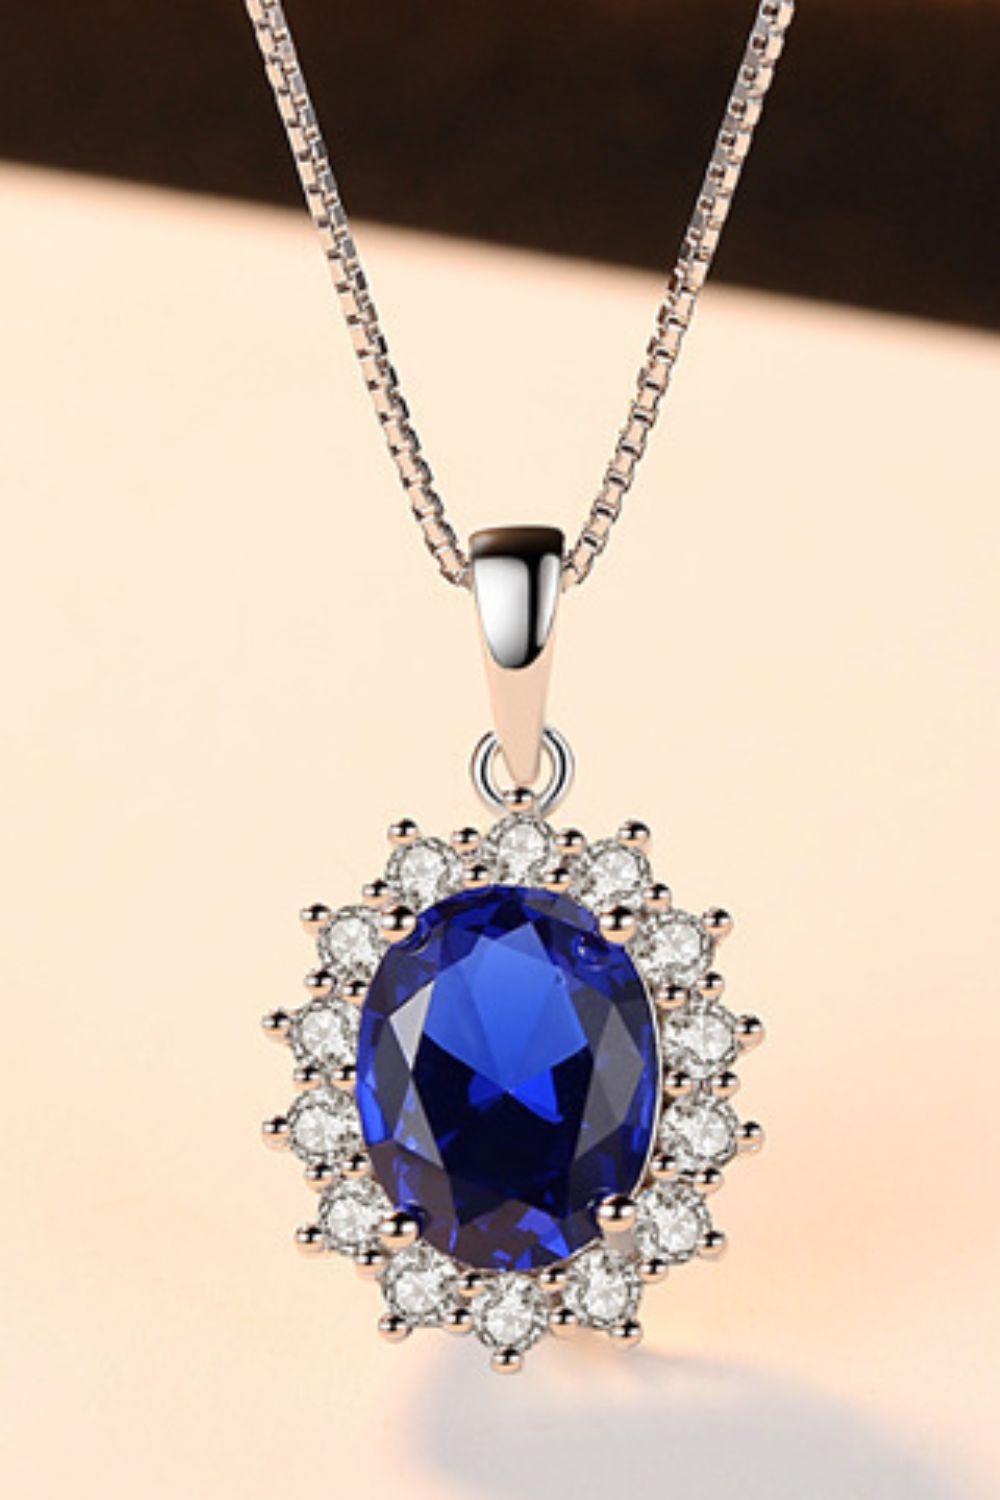 Synthetic Sapphire Pendant 925 Sterling Silver Necklace - Lab Fashion, Home & Health